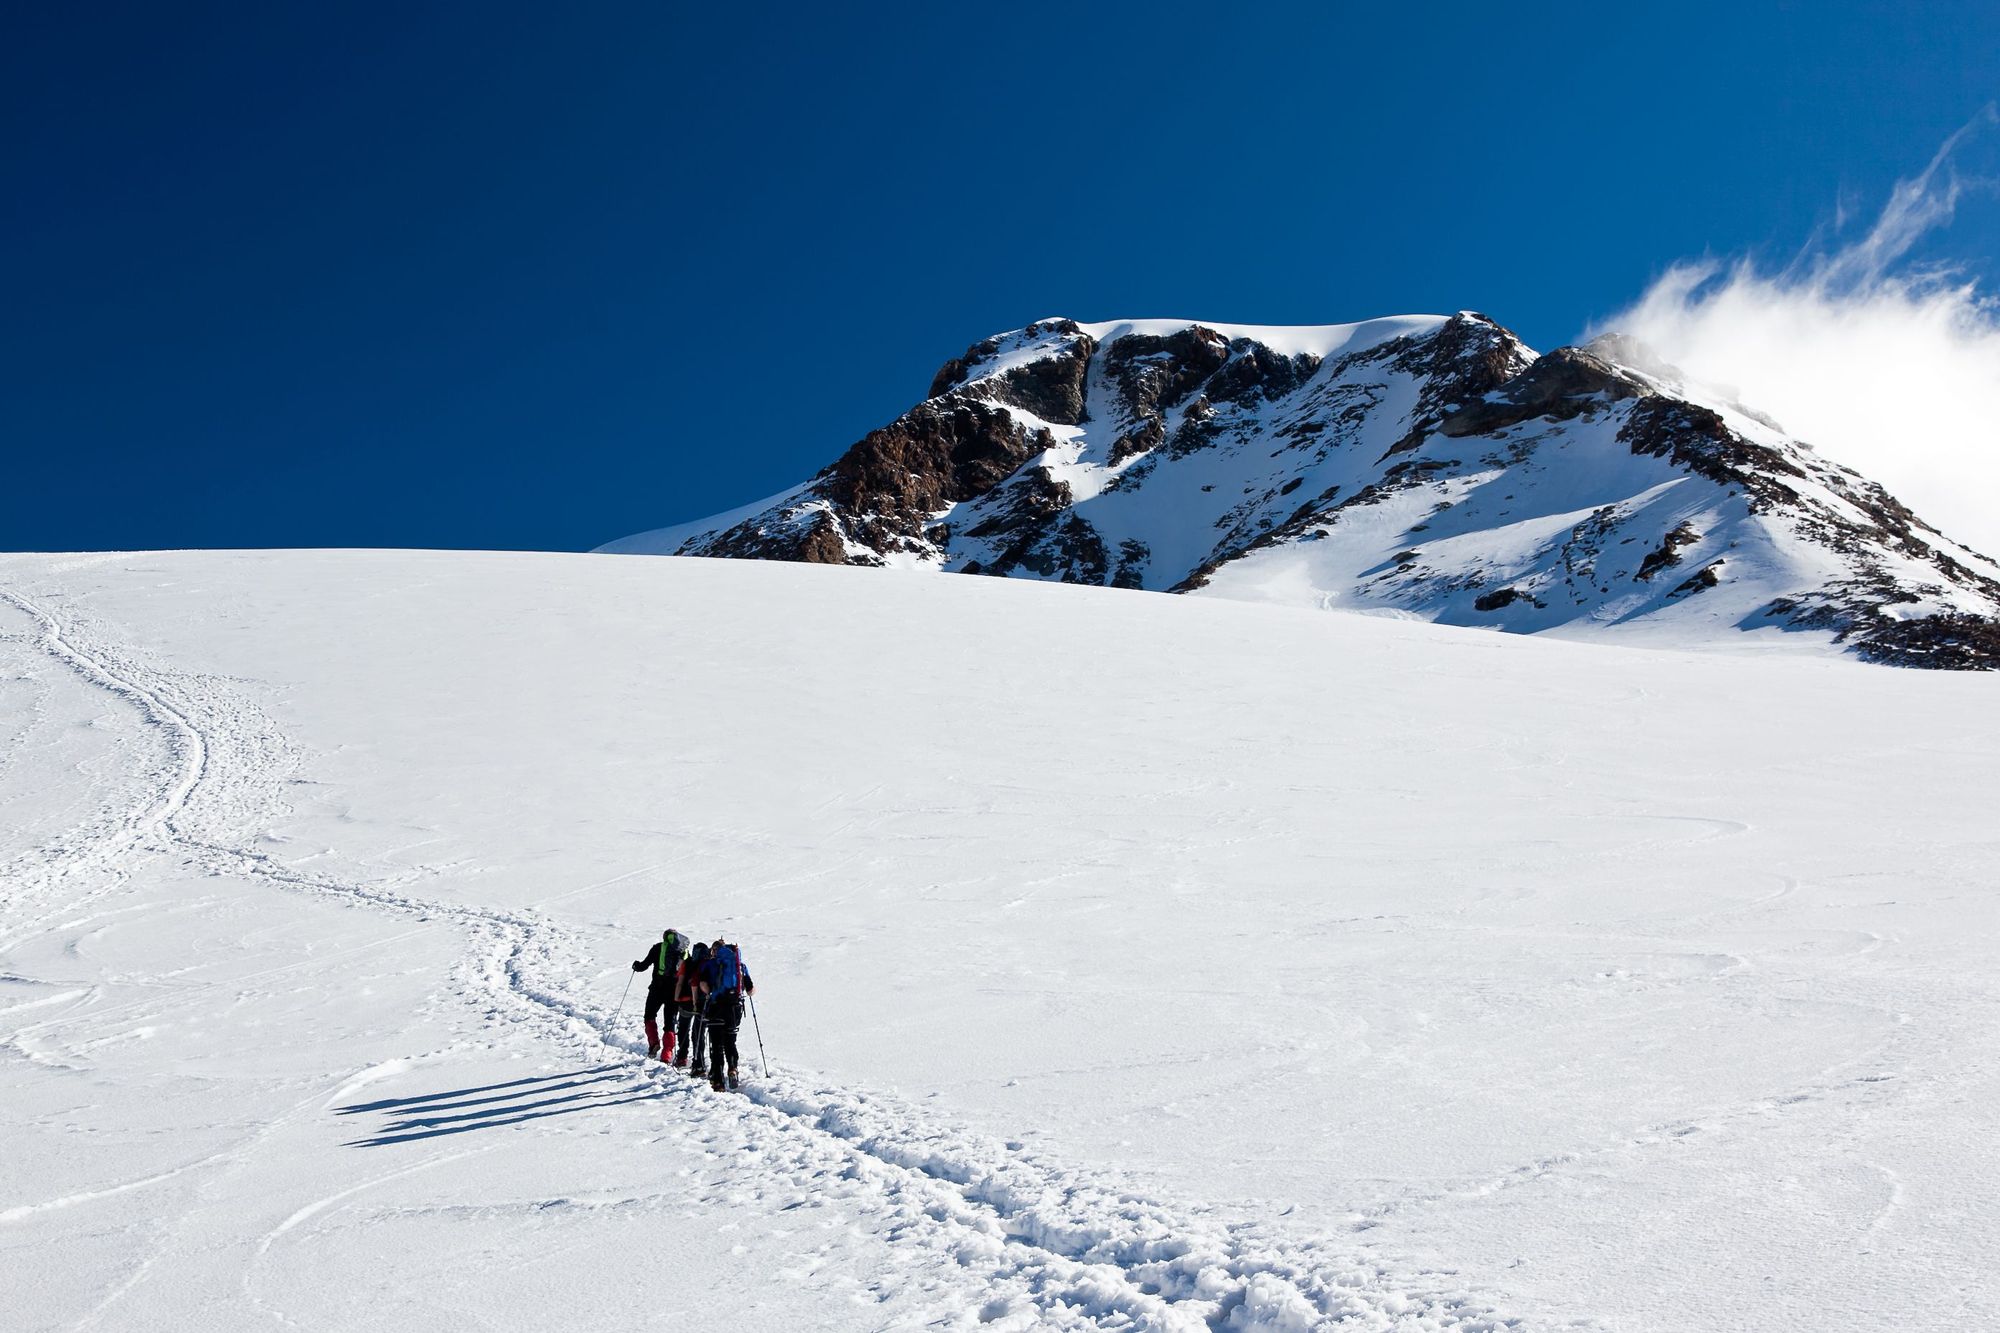 A group of trekkers make their way up the Monte Rosa plateau, heading for Signalkuppe. Photo: Altai